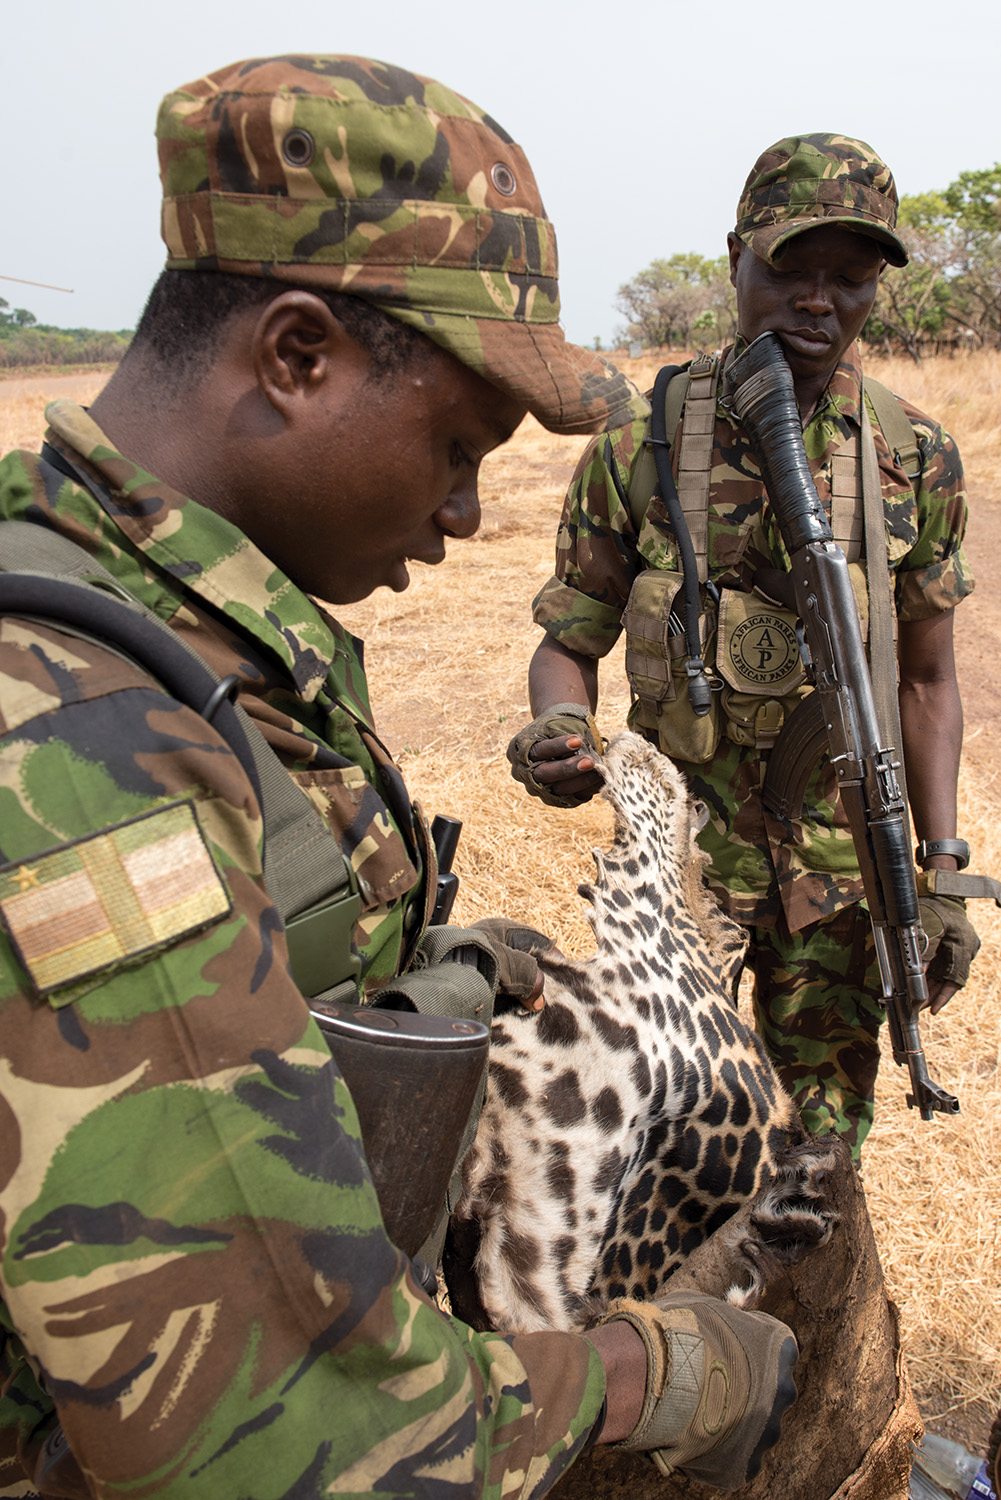 Lieutenant Ponce Pilate Mbenga, a Central African Army officer with the Chinko Project, looks on as one of the rangers examines a leopard skin confiscated from Mbororo poachers during a camp raid. 